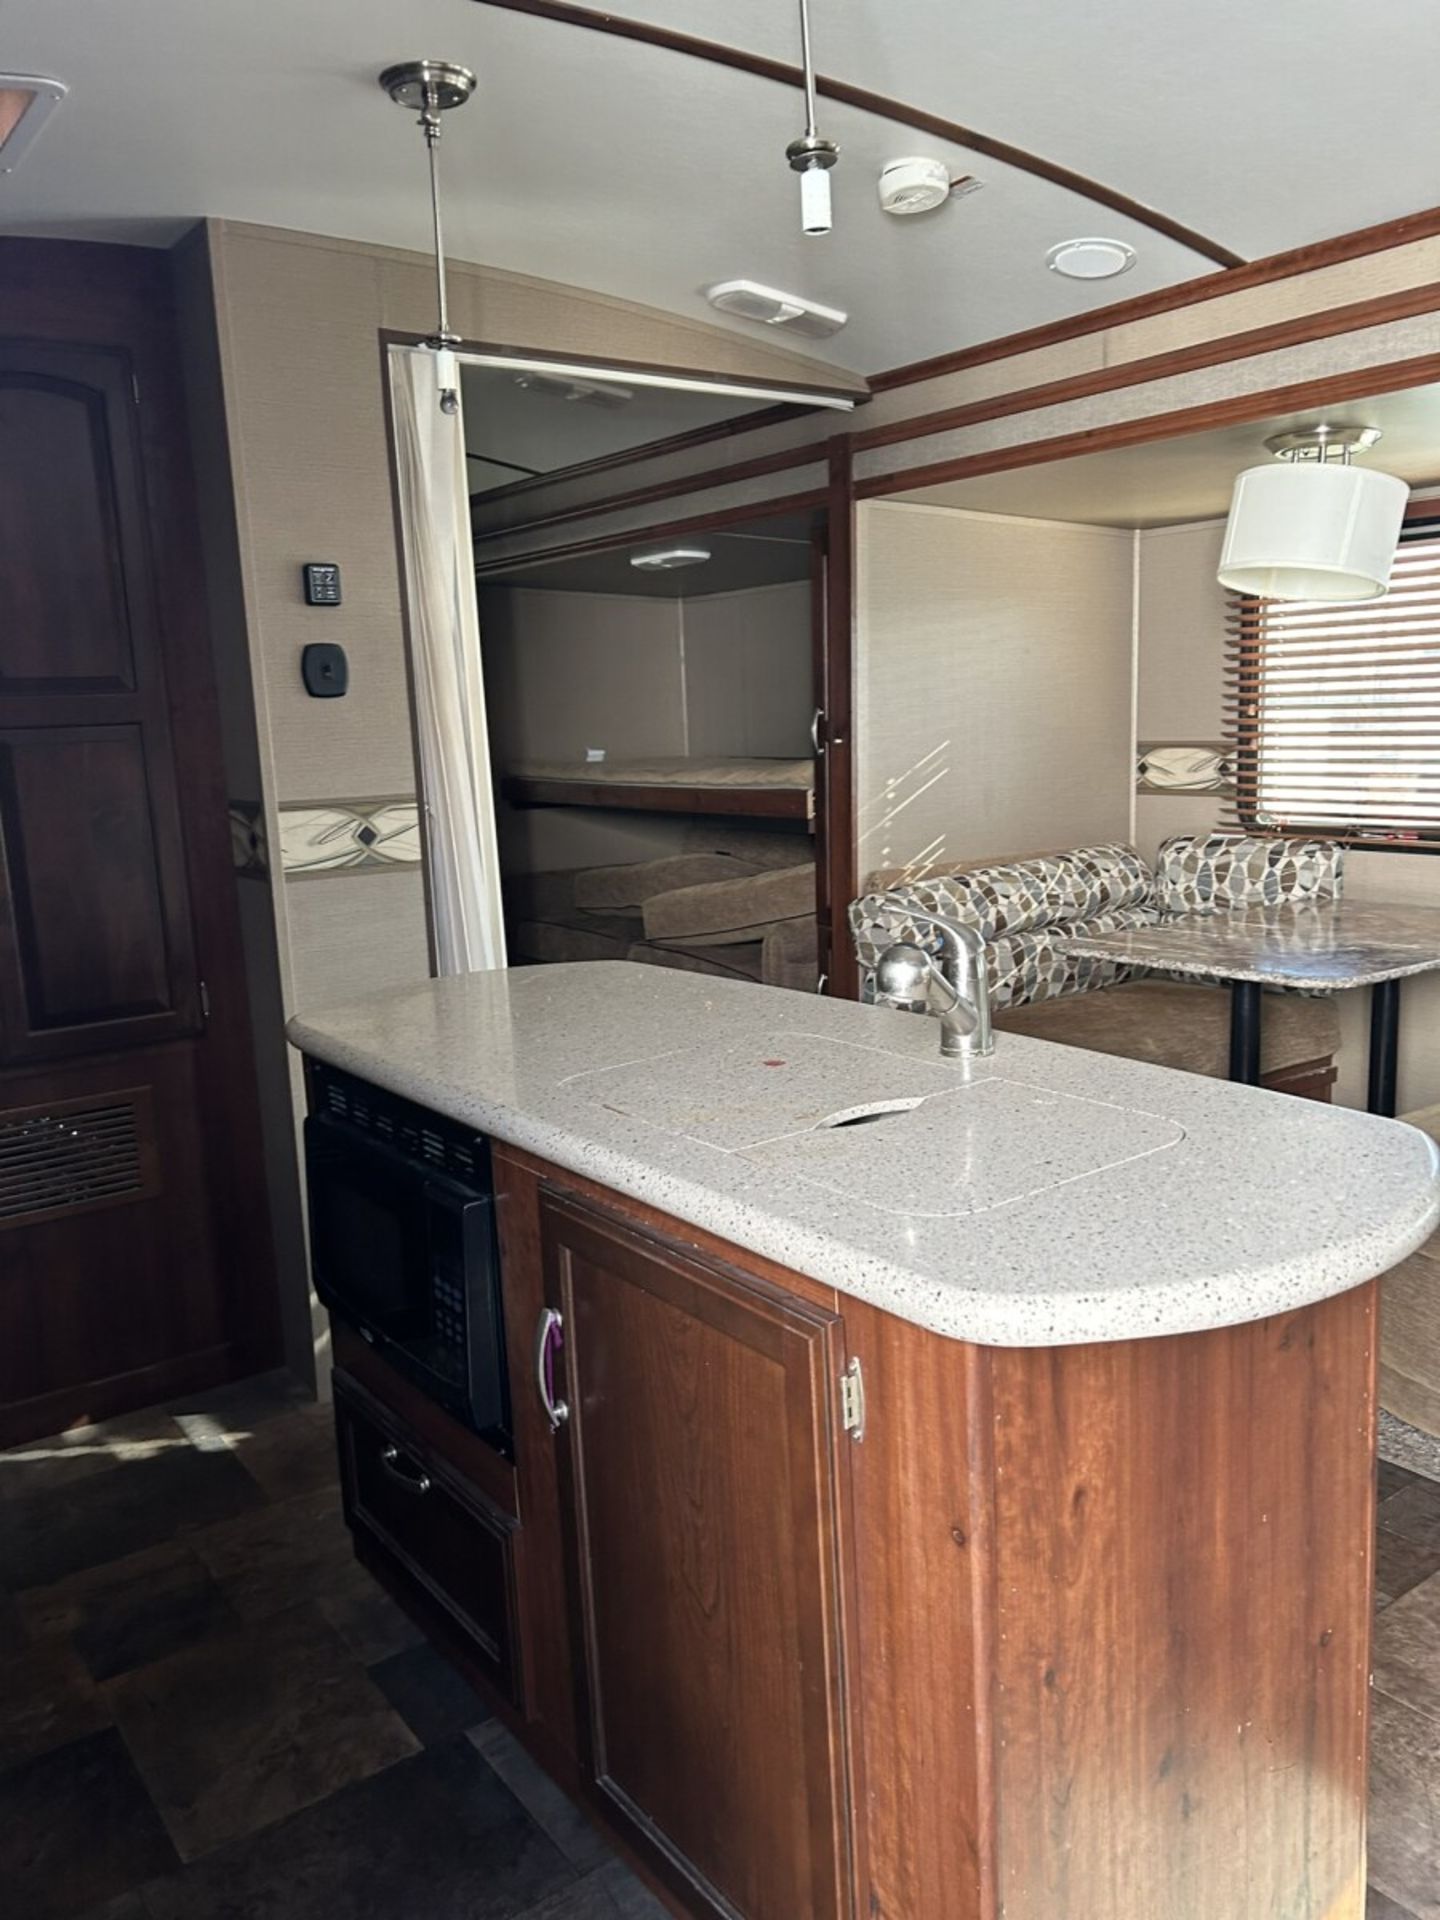 2014 OUTBACK KEYSTONE SUPER-LITE 33 FT HOLIDAY TRAILER, DOUBLE SLIDE, POWER AWNING, OUTDOOR KITCHEN, - Image 4 of 15